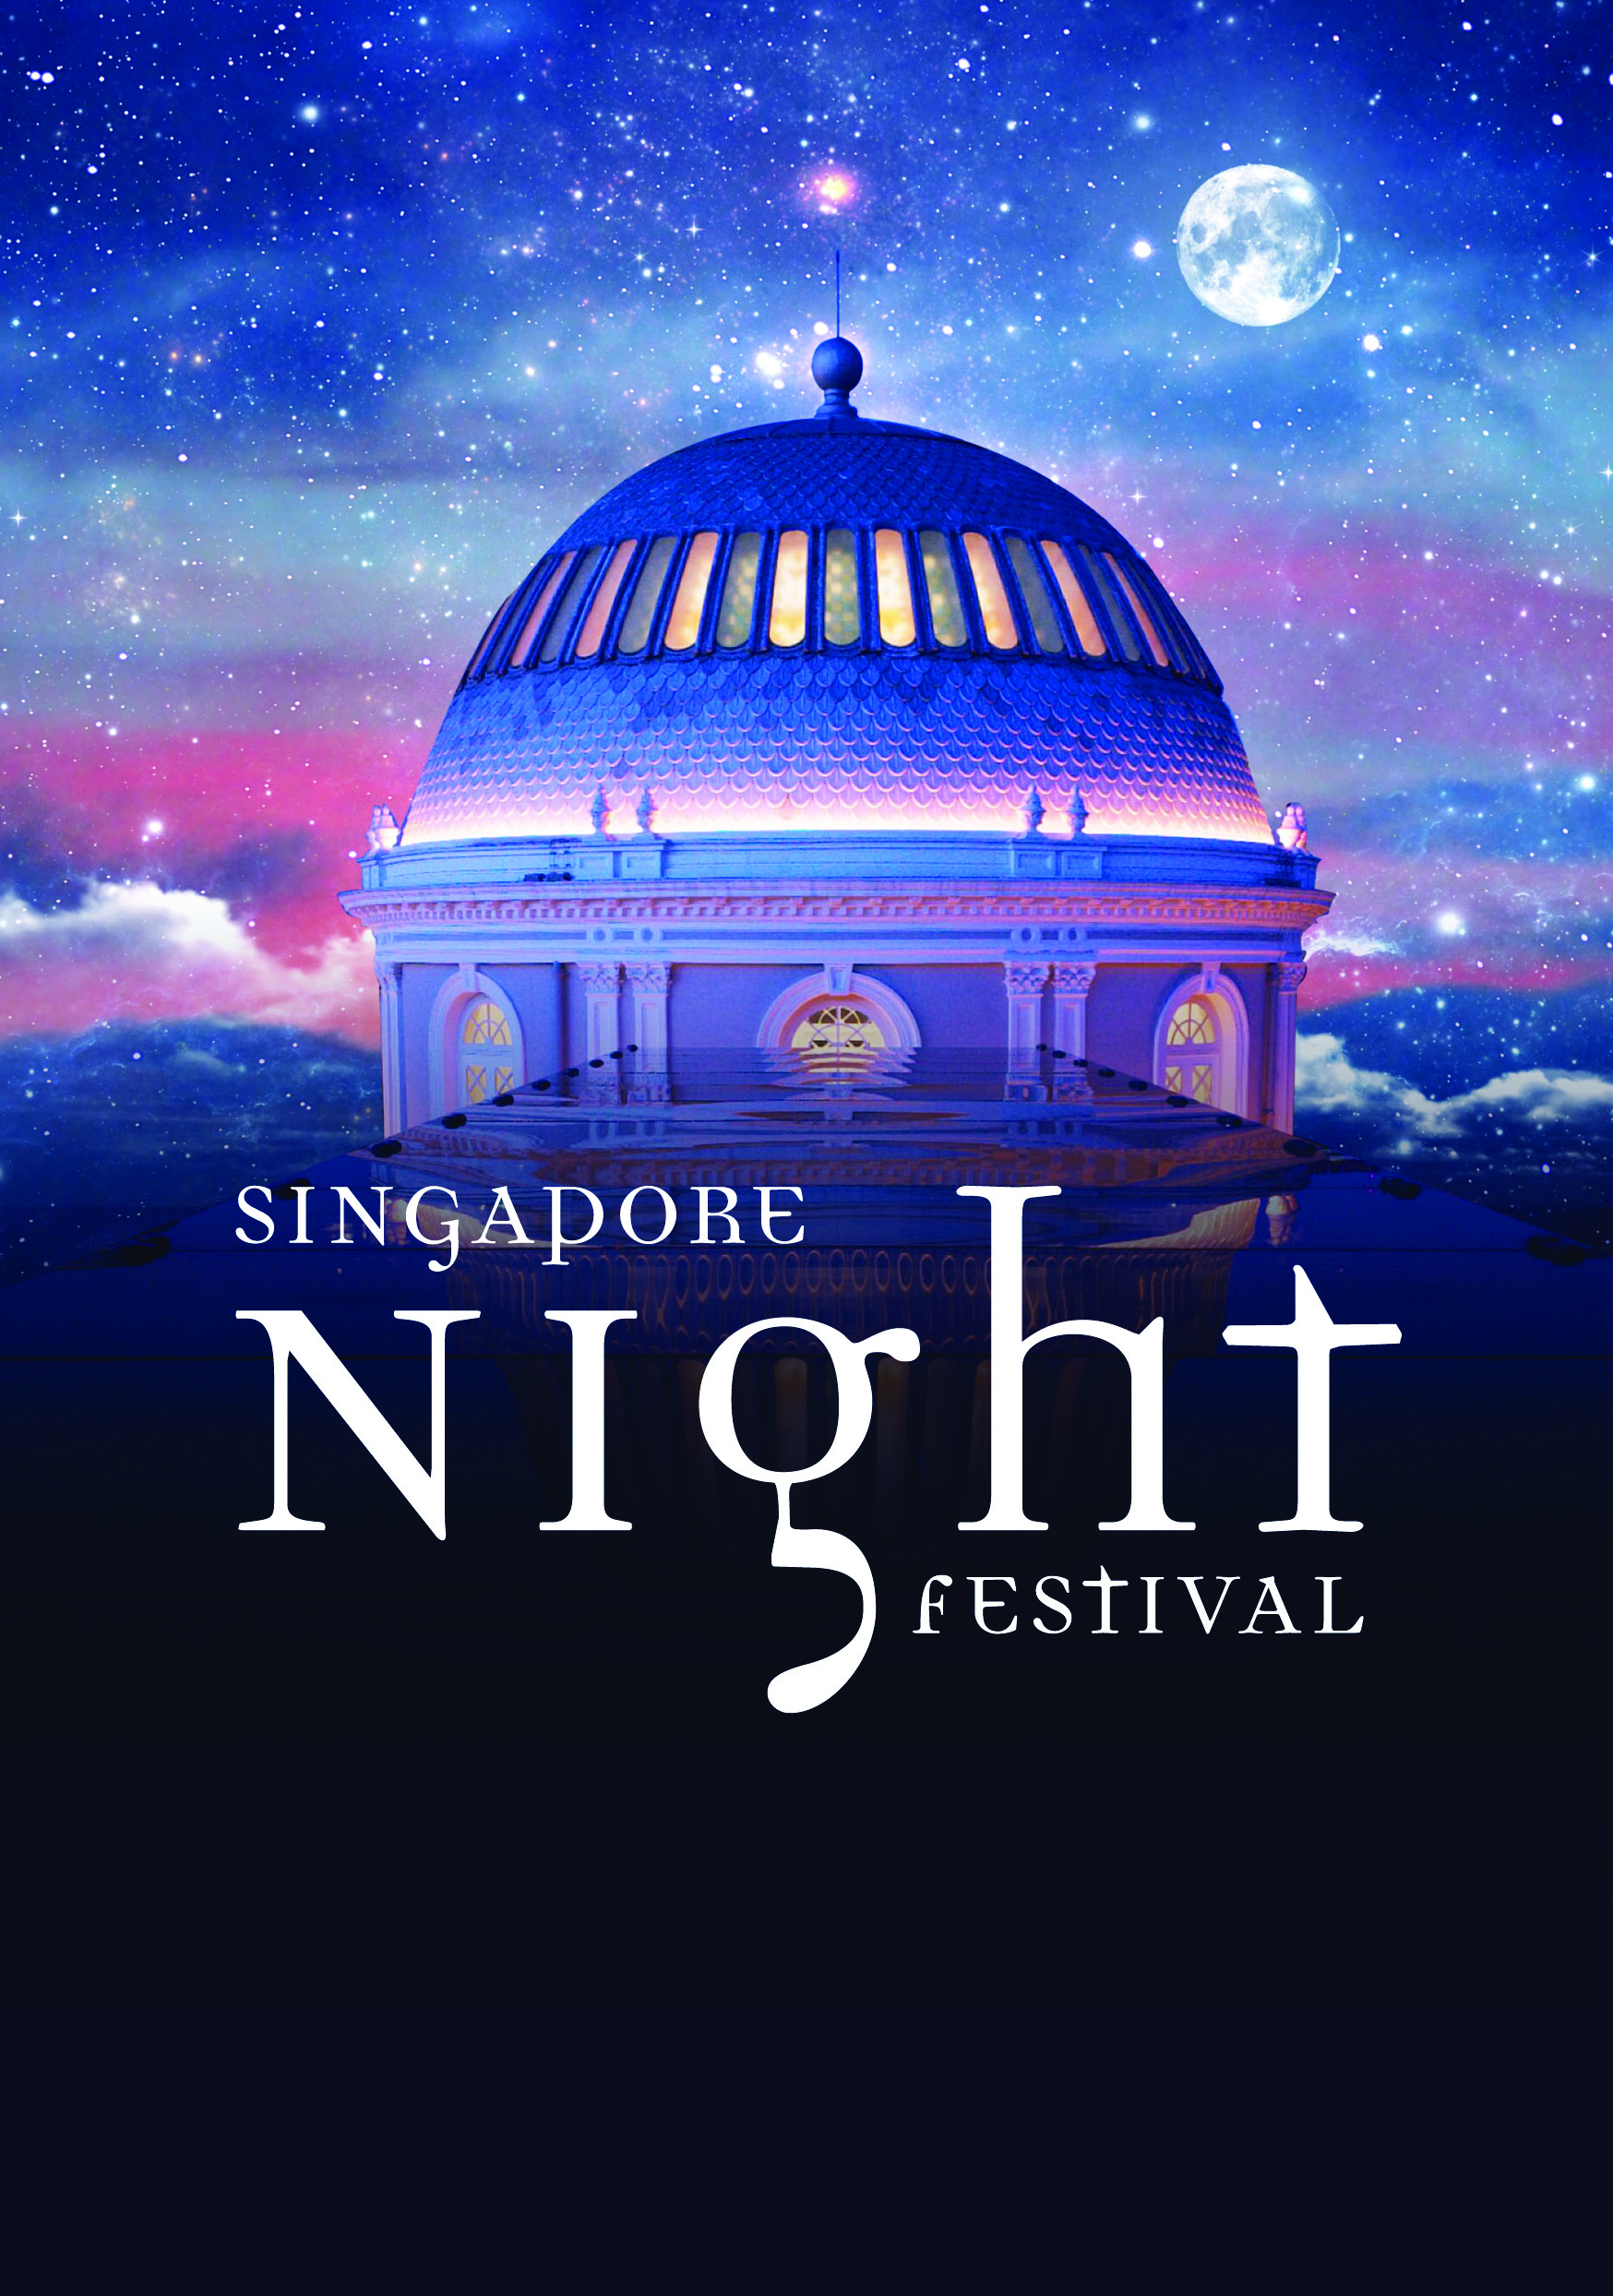 Singapore Night Festival - Fonts In Use